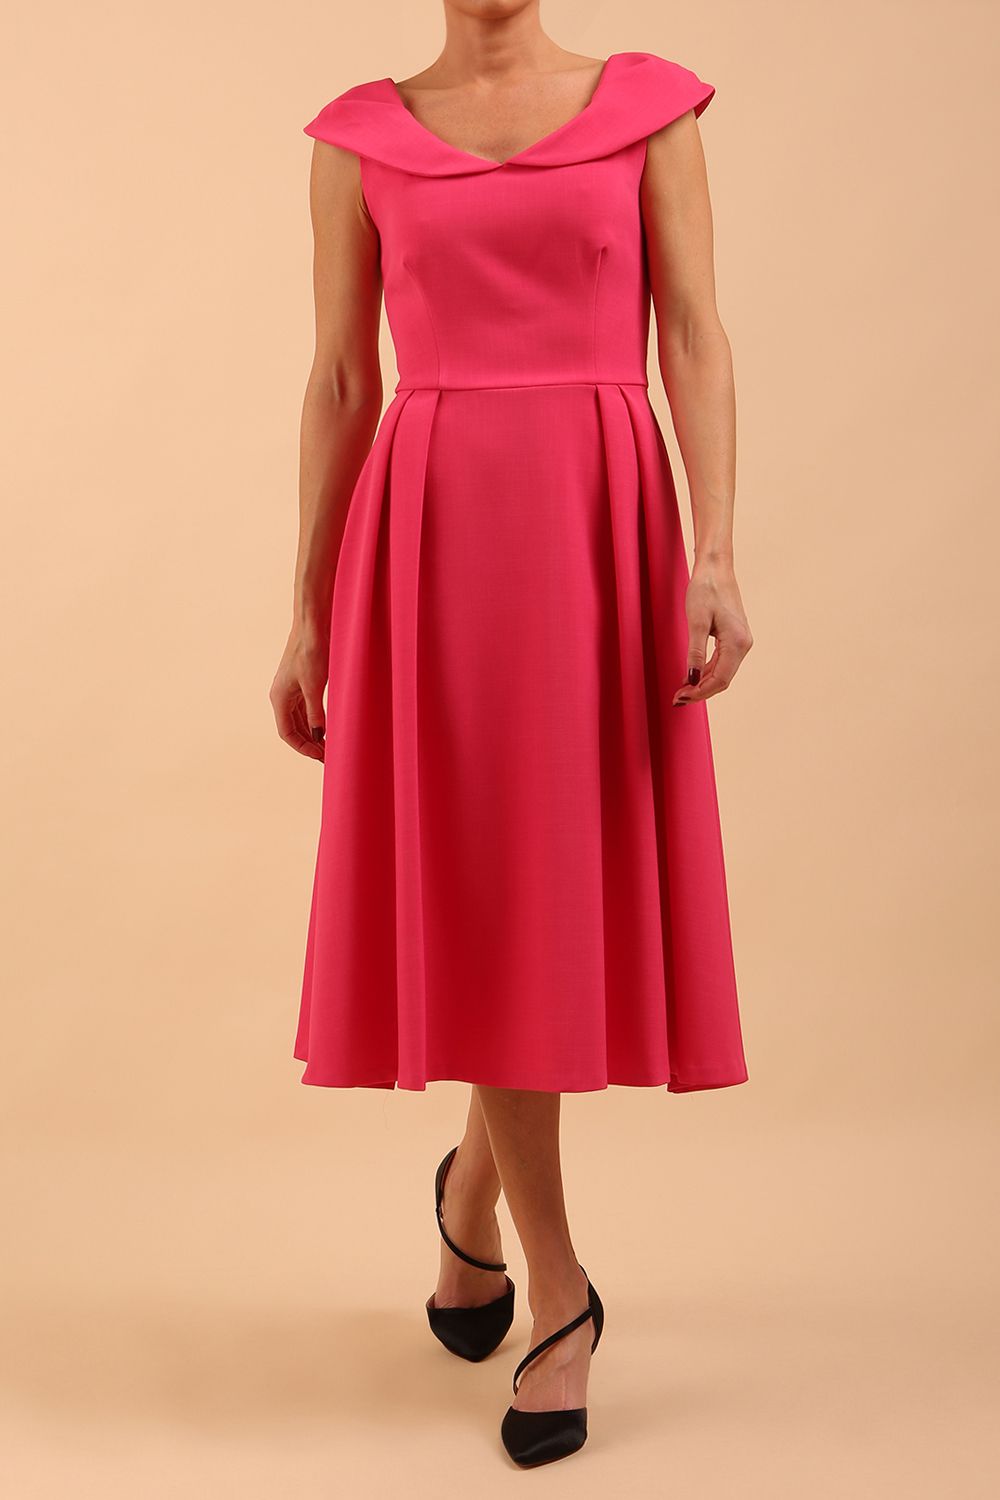 model is wearing divacatwalk Chesterton Sleeveless a-line swing dress in fuchsia pink with oversized collar front